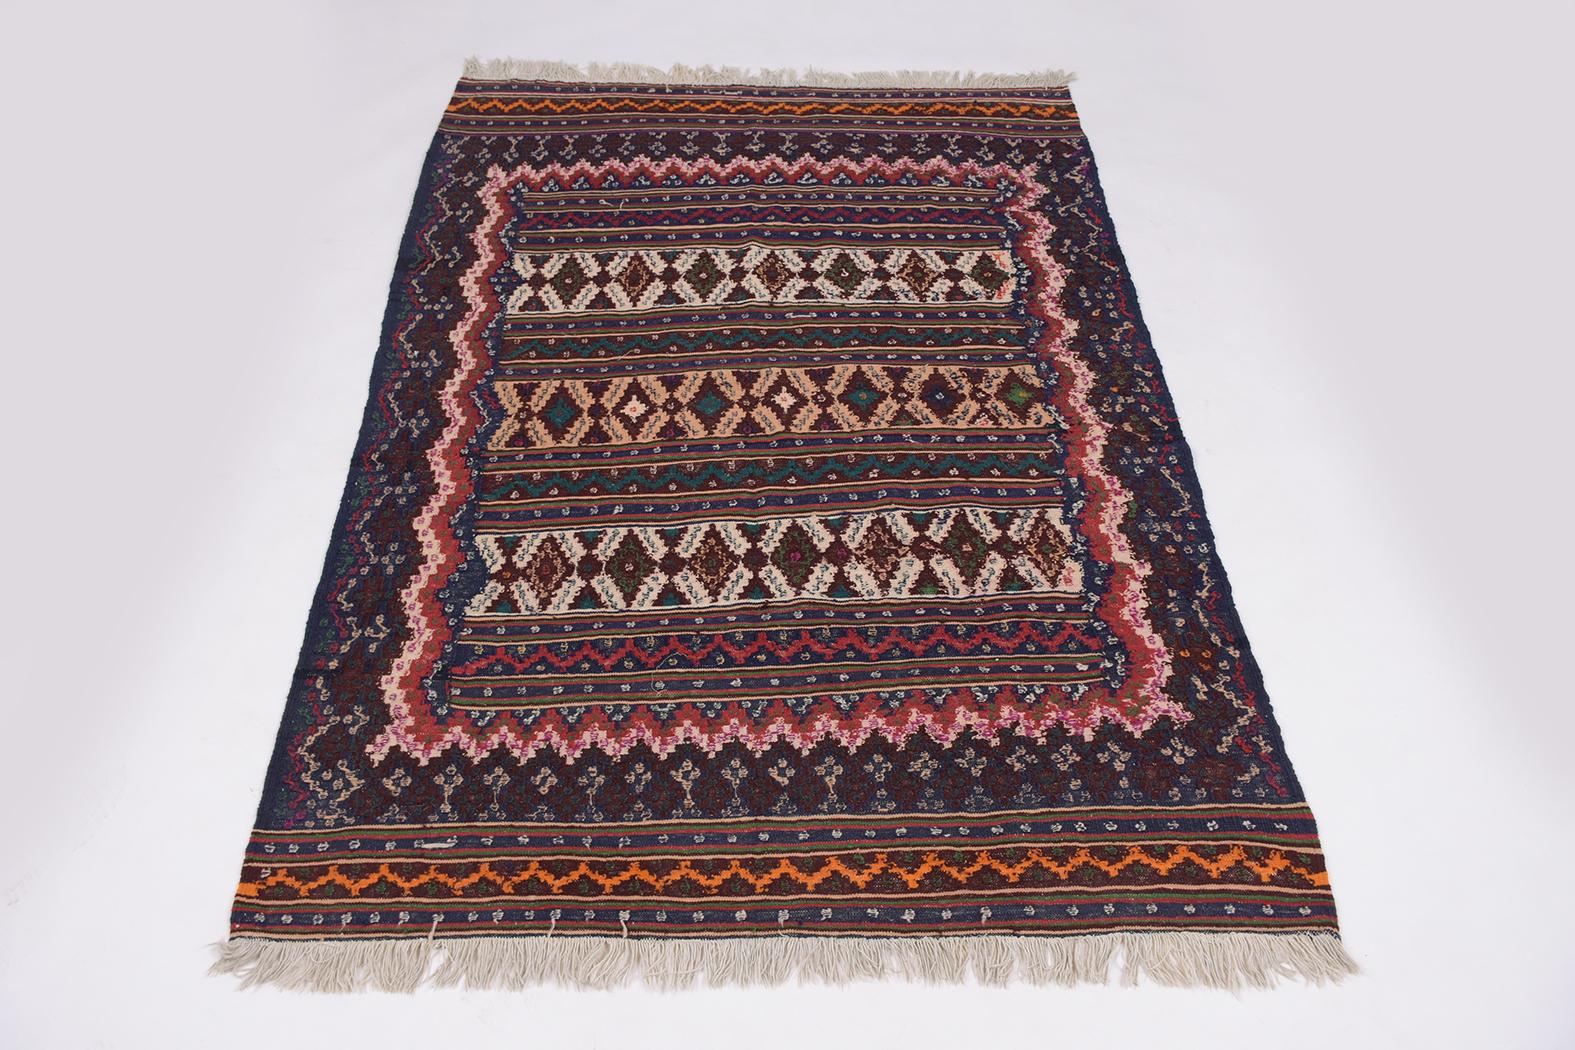 An extraordinary textile rug in great condition beautiful hand-crafted out of wool, this vintage throw rug is eye-catching features an asymmetric multi-color and tassels design perfect for a unique living room design inspiration decor.